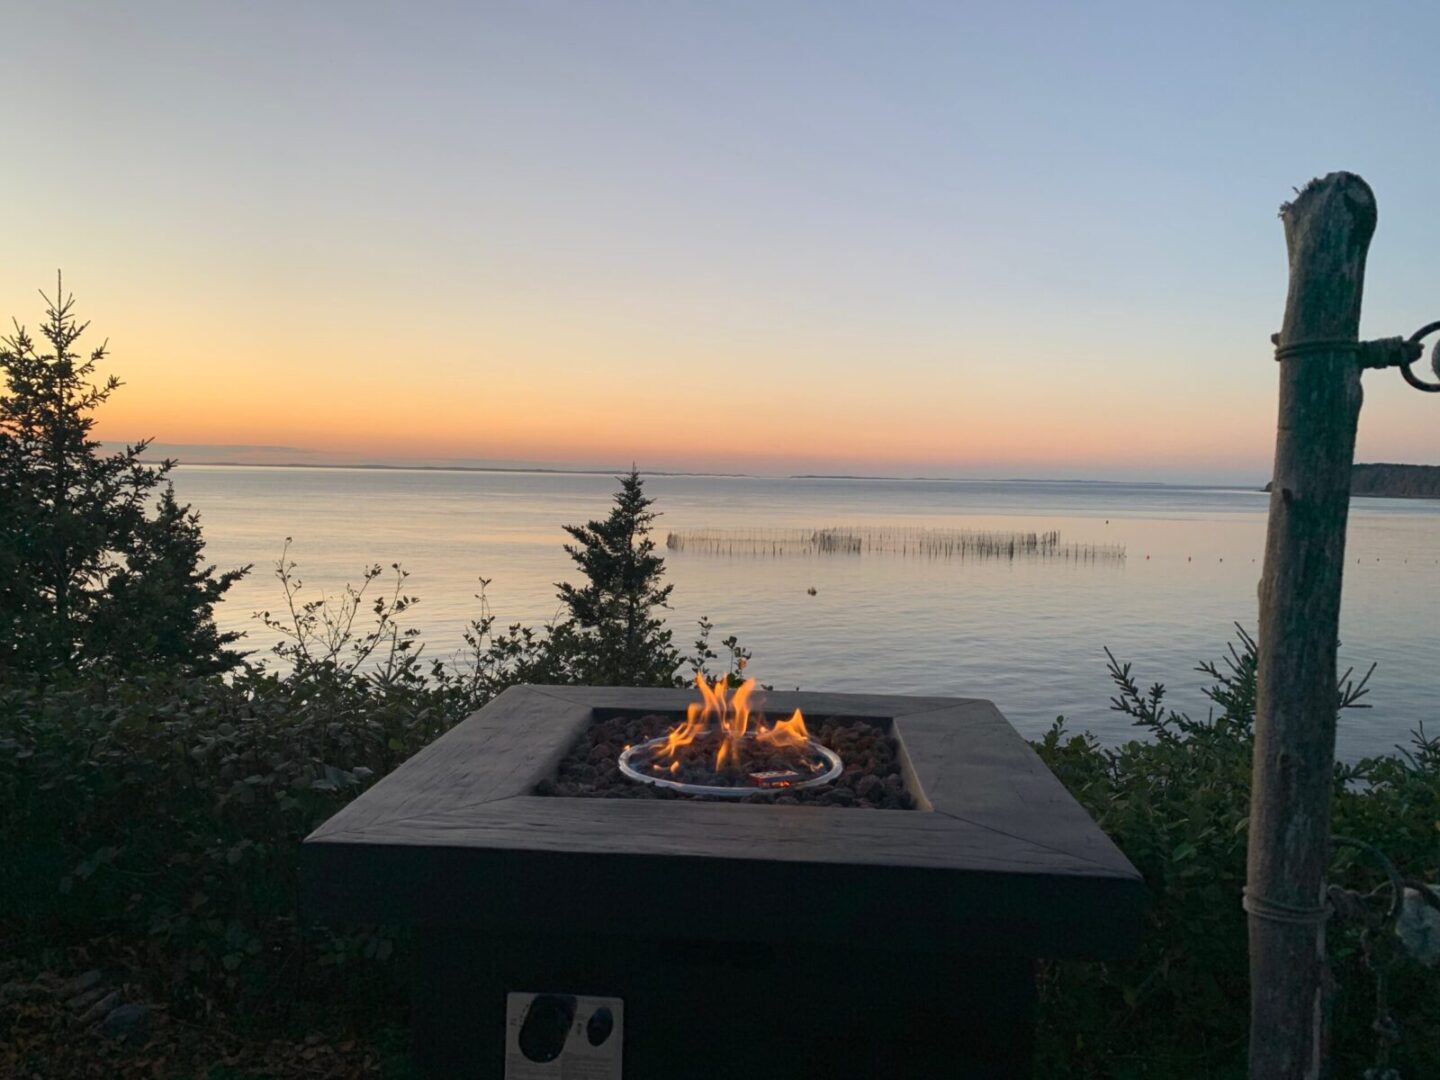 A fire pit in front of a body of water.